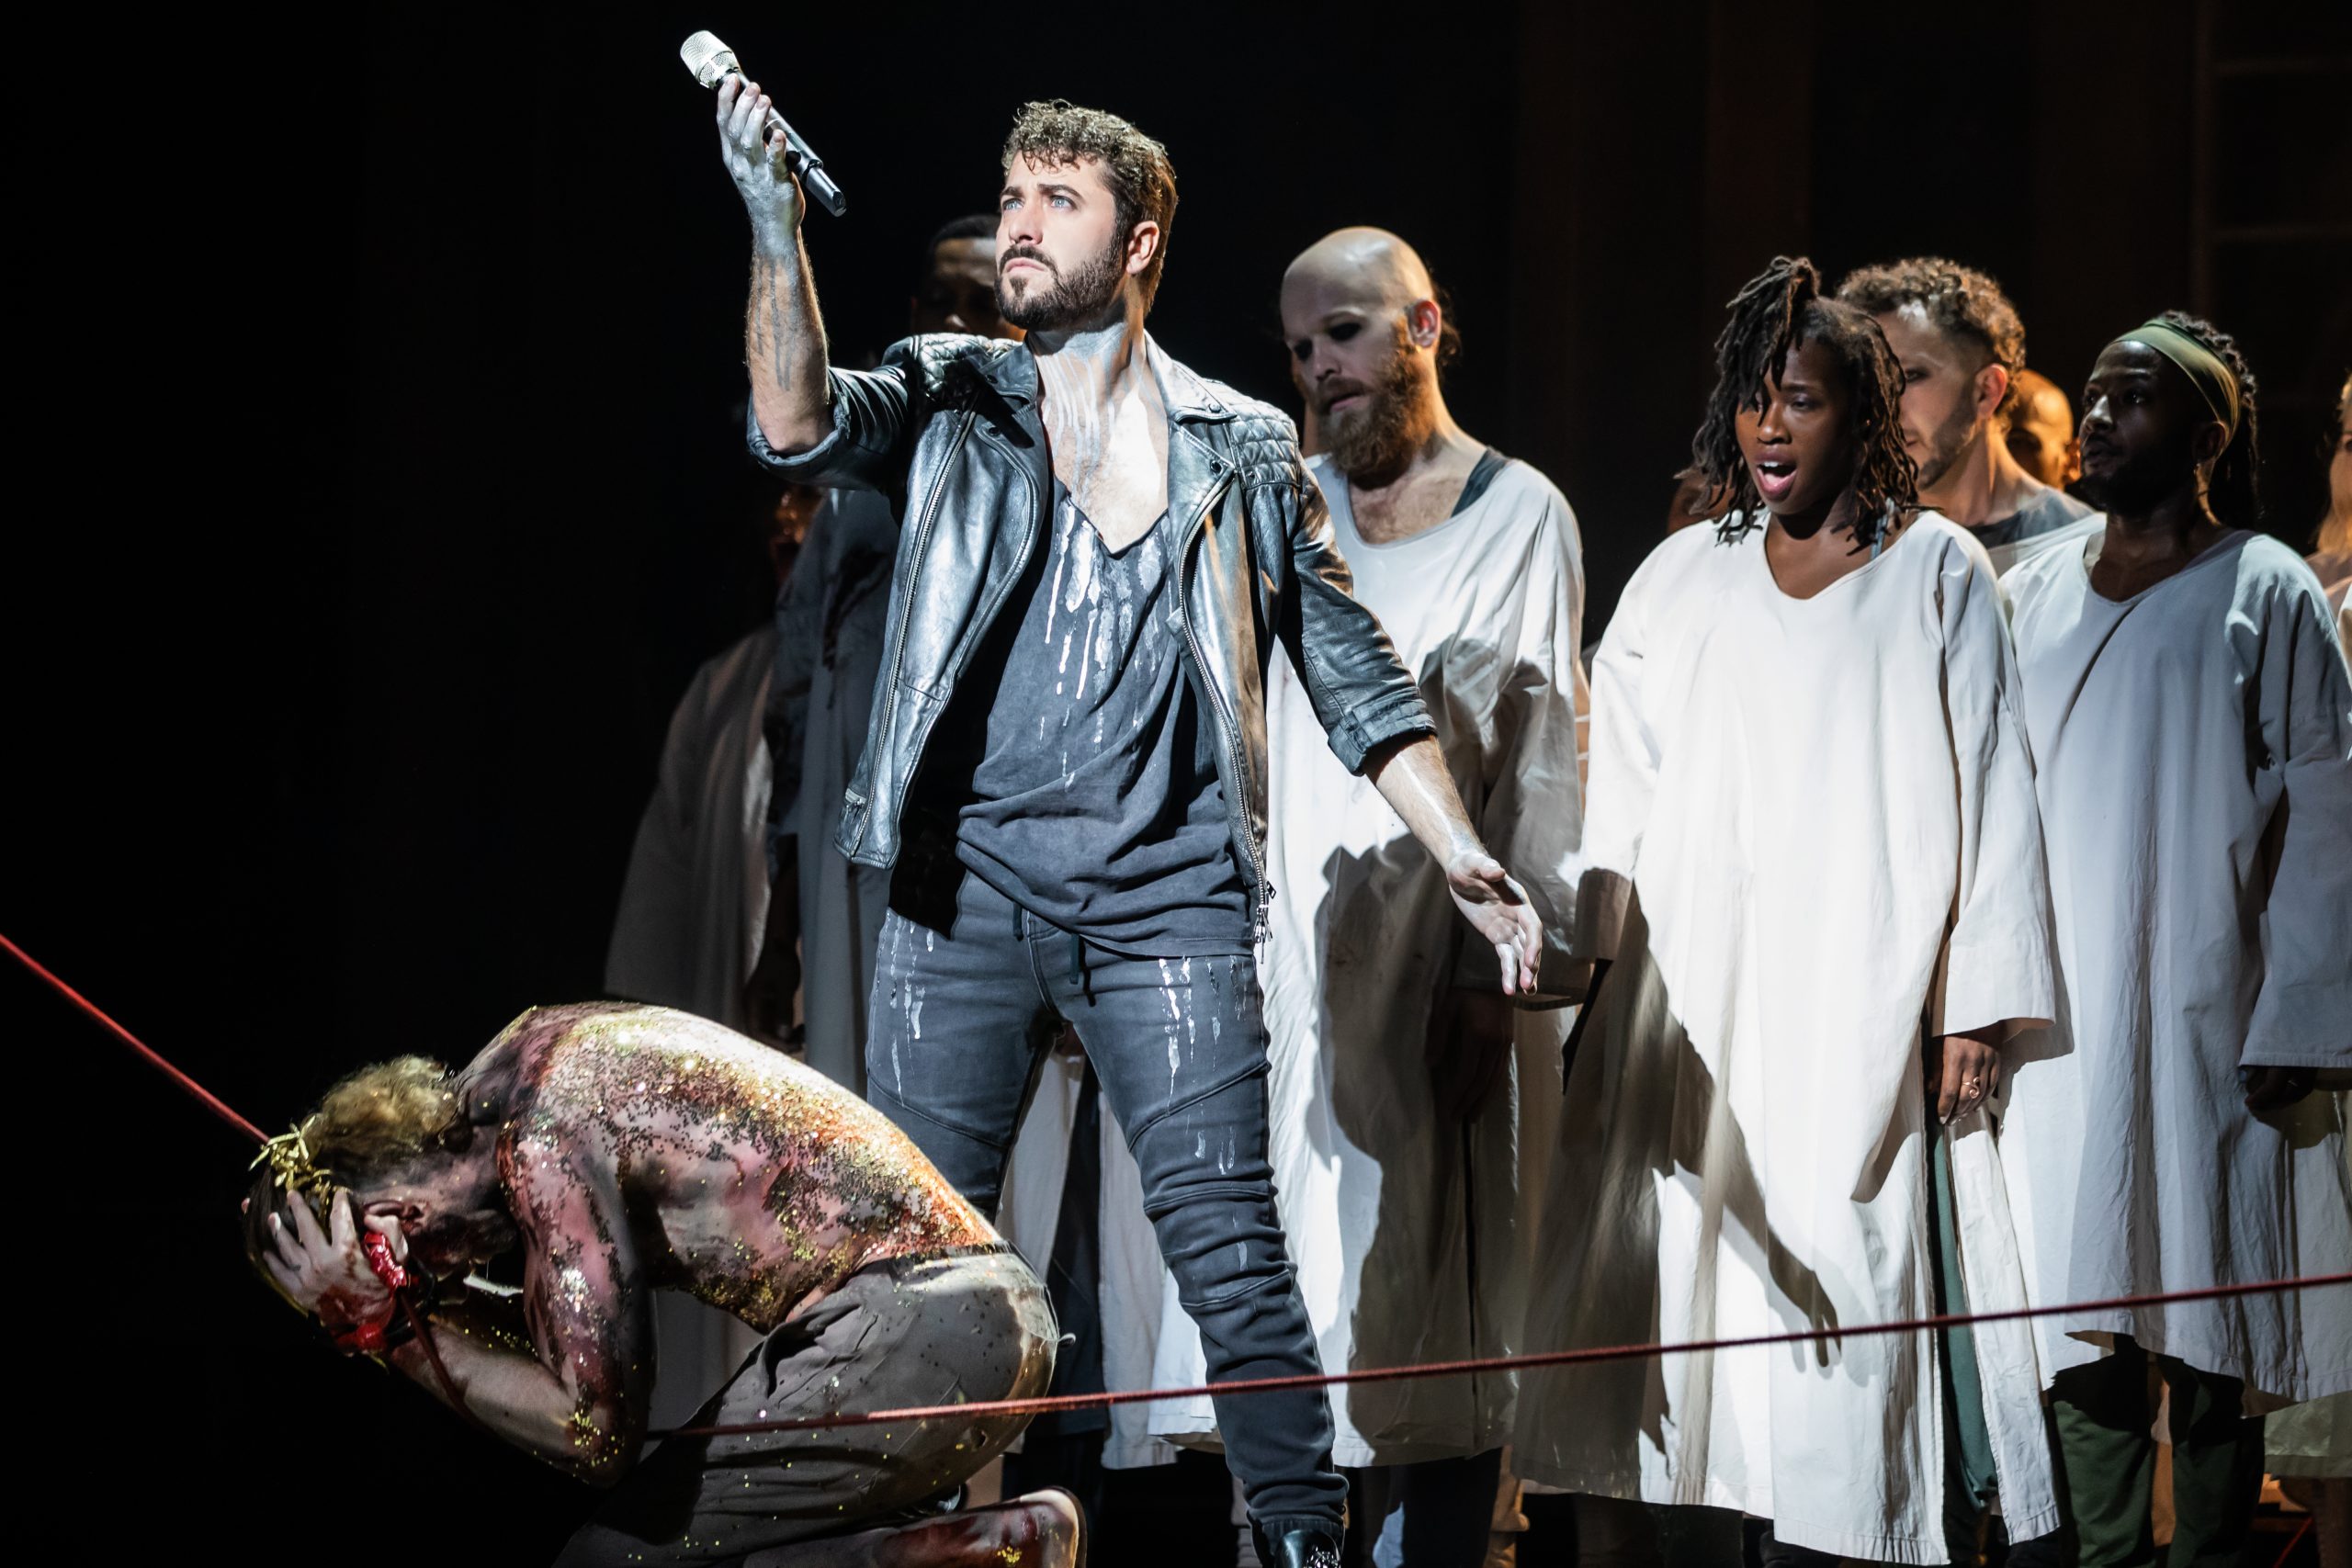 Omar Lopez-Cepero, Aaron LaVigne and the company of the North American Tour of JESUS CHRIST SUPERSTAR. Photo by Evan Zimmerman for MurphyMade